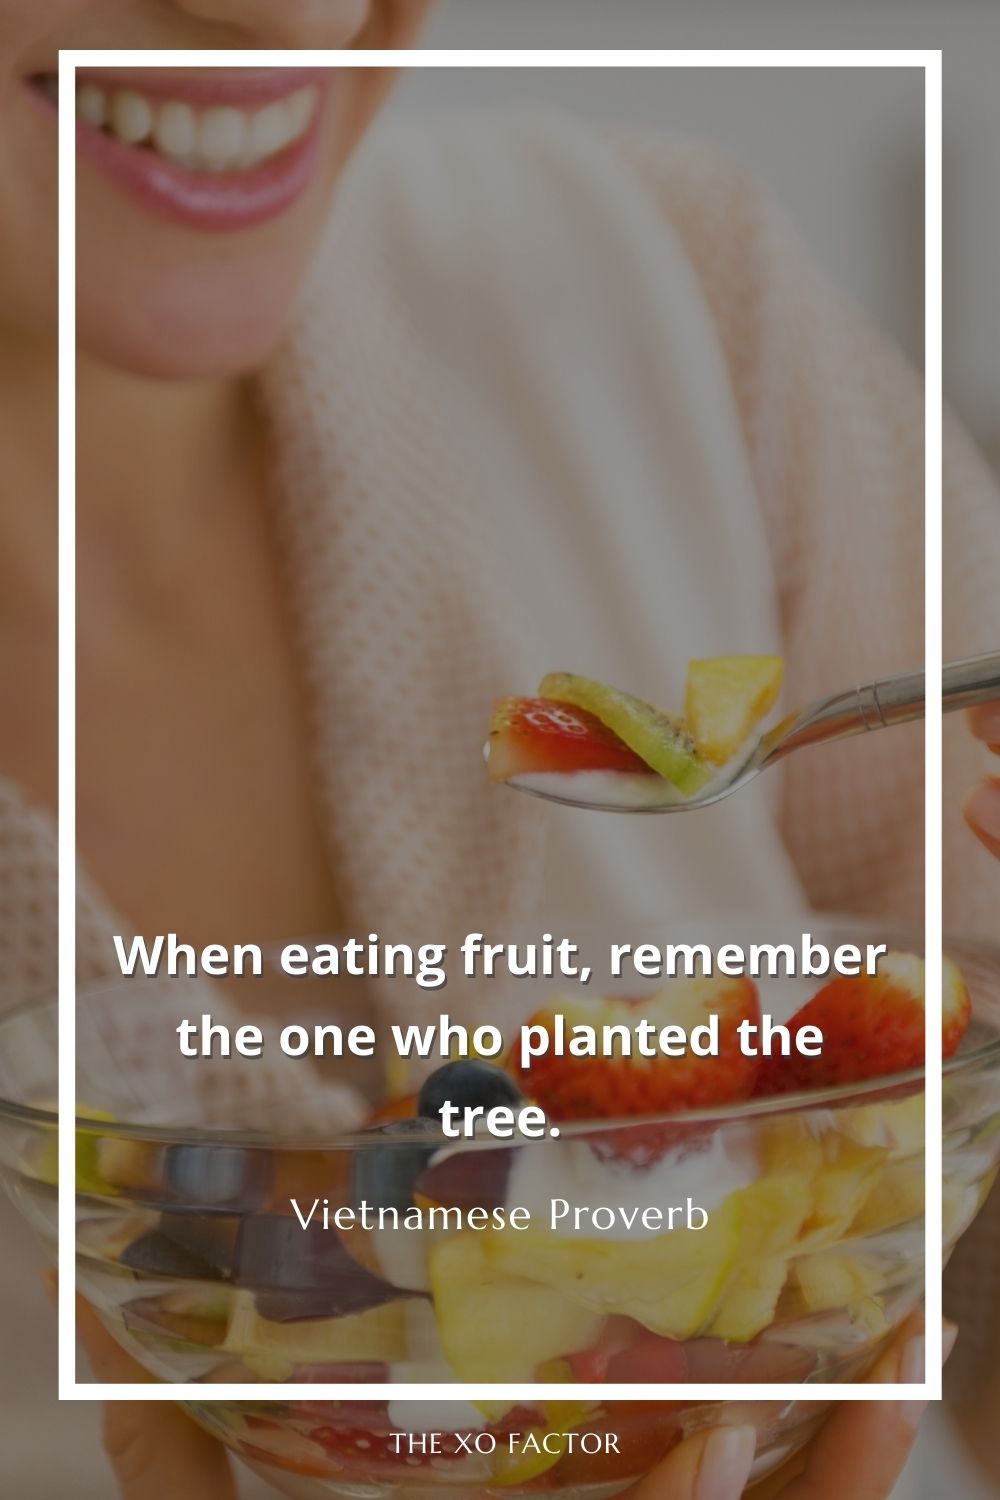 When eating fruit, remember the one who planted the tree.